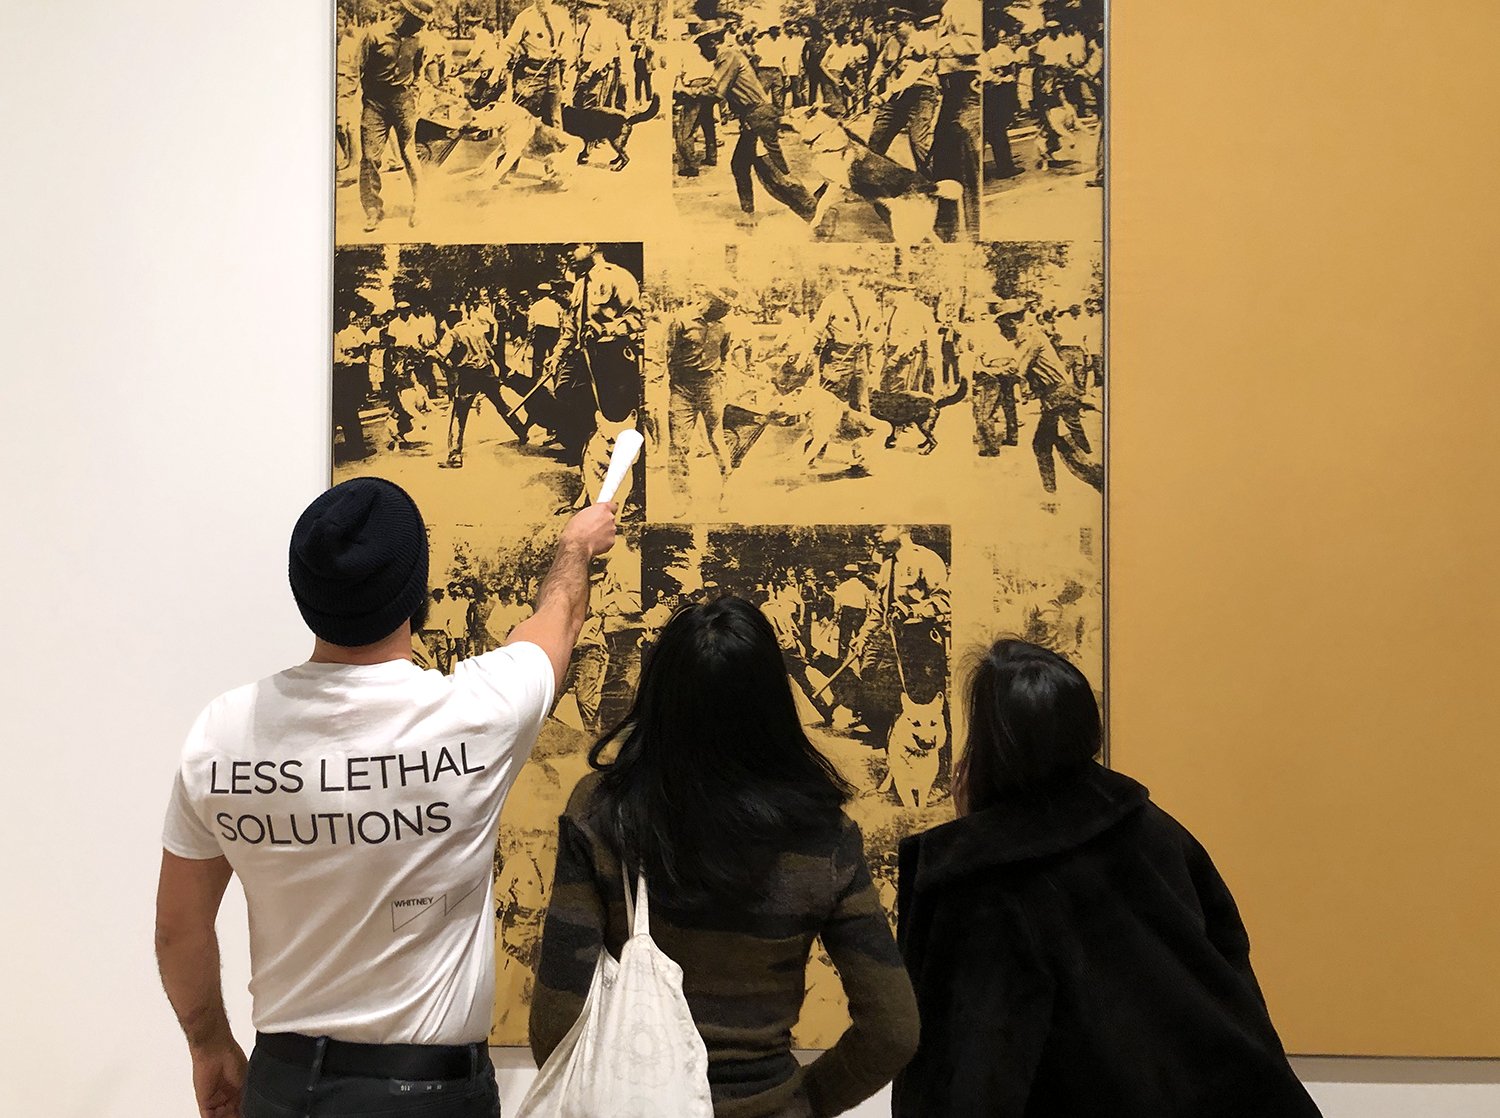   Less Lethal Solutions (Whitney Museum, NY, NY)  site-specific guerilla intervention, custom silkscreened t-shirt, photographic documentation 